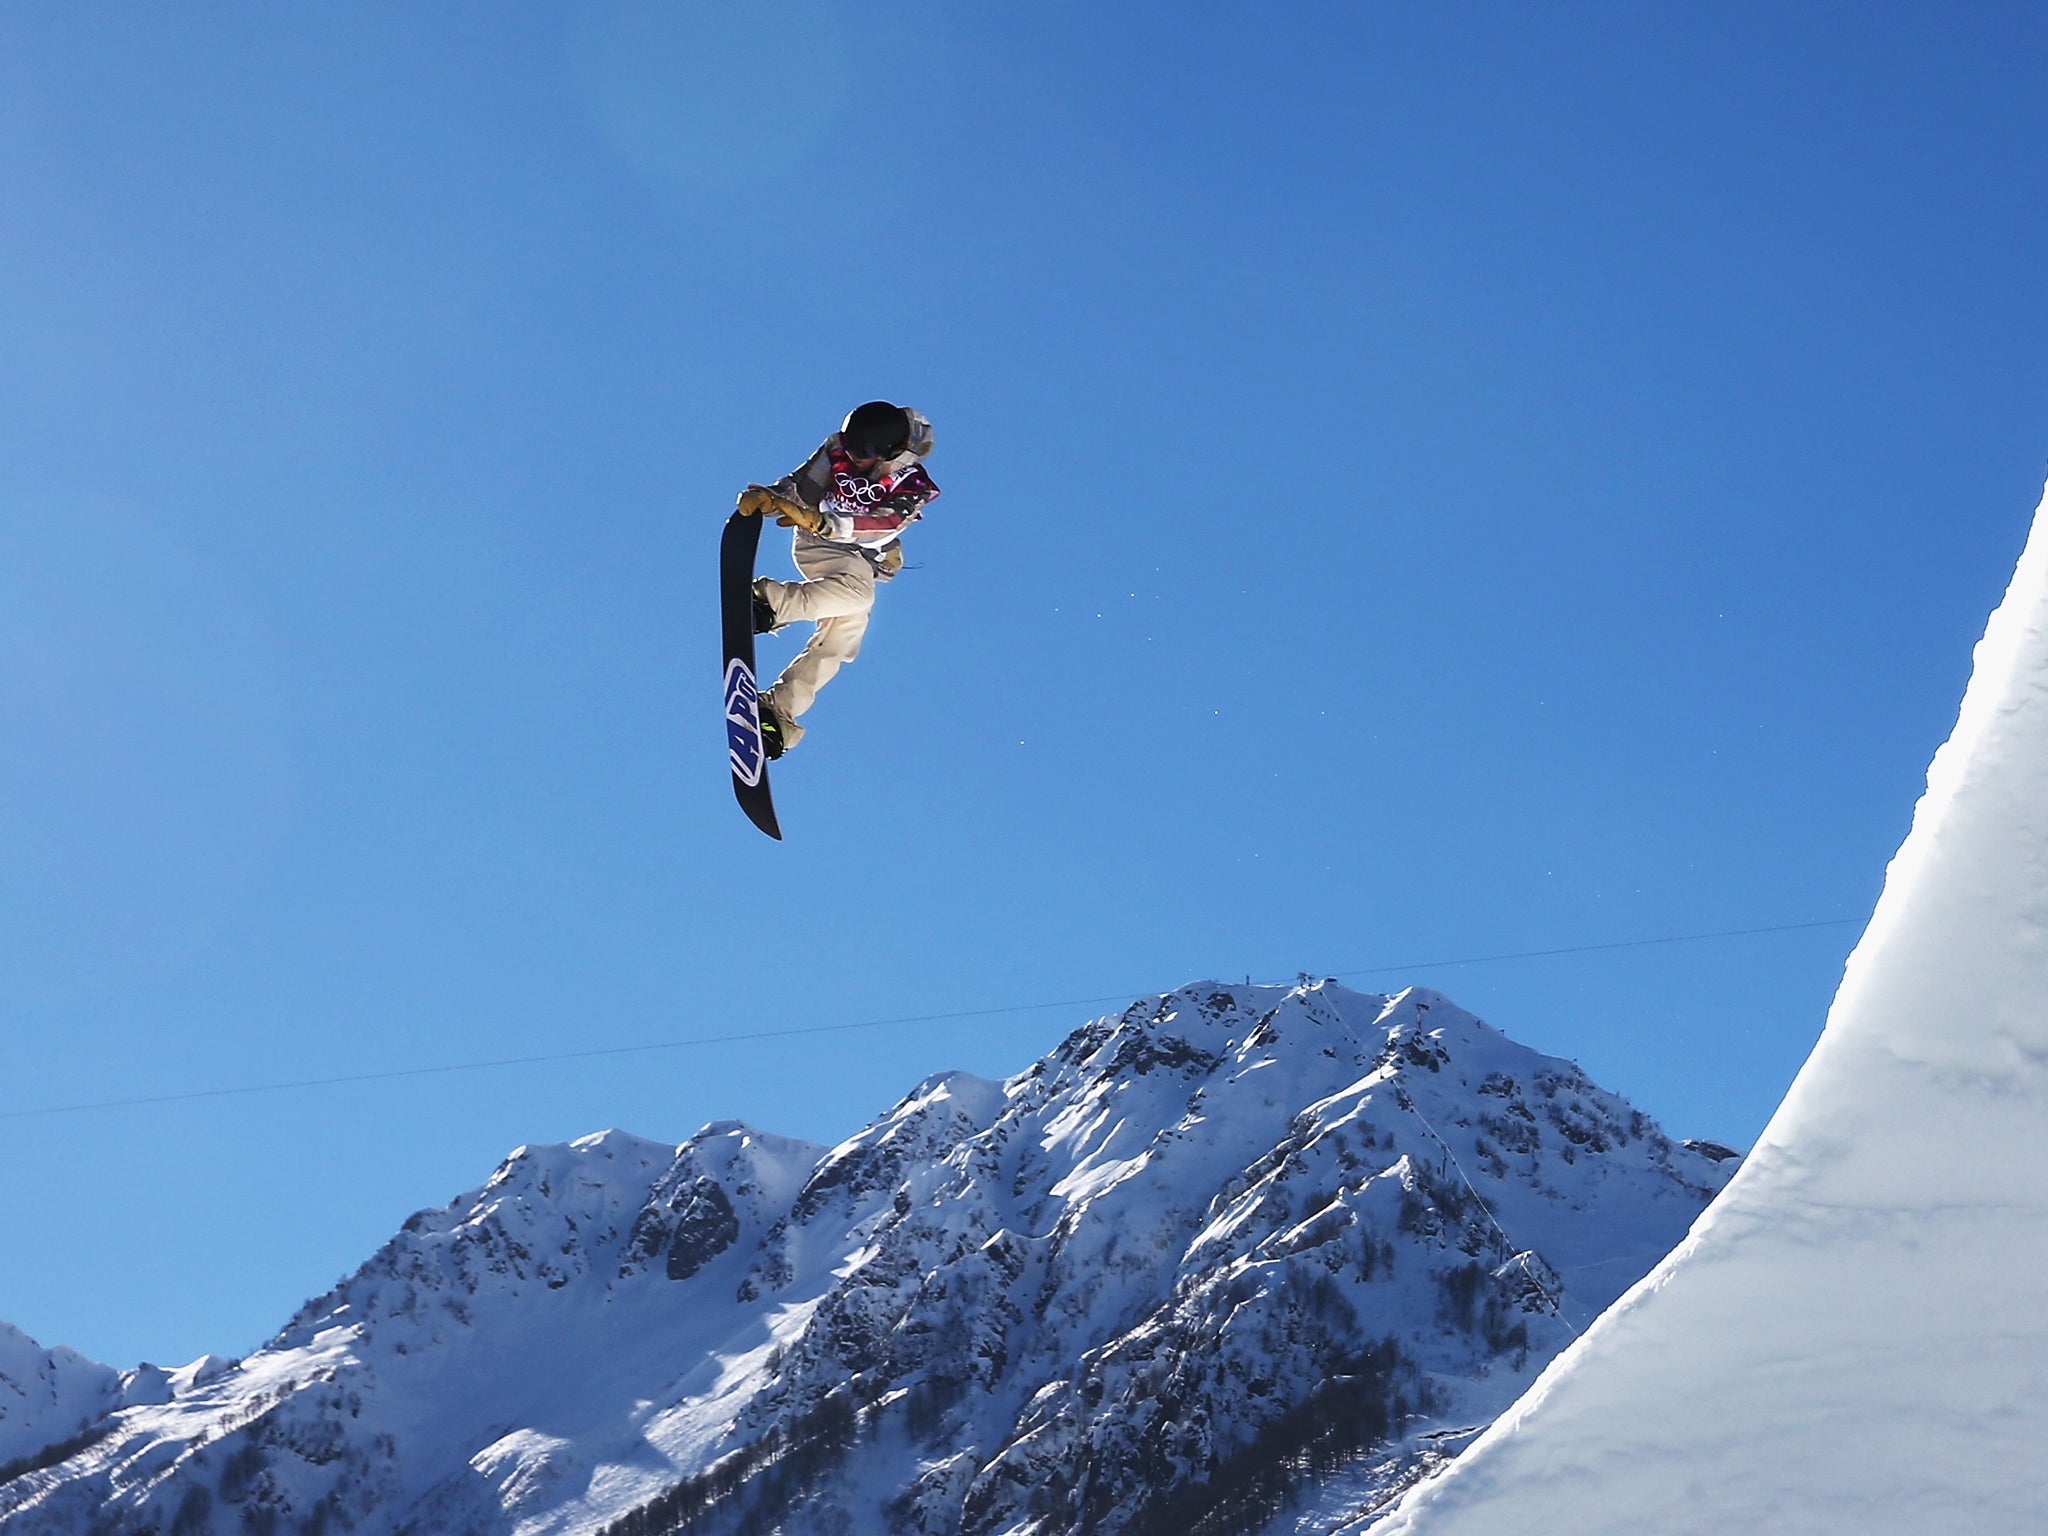 Sage Kotsenburg of the USA took gold in the snowboard slopestyle